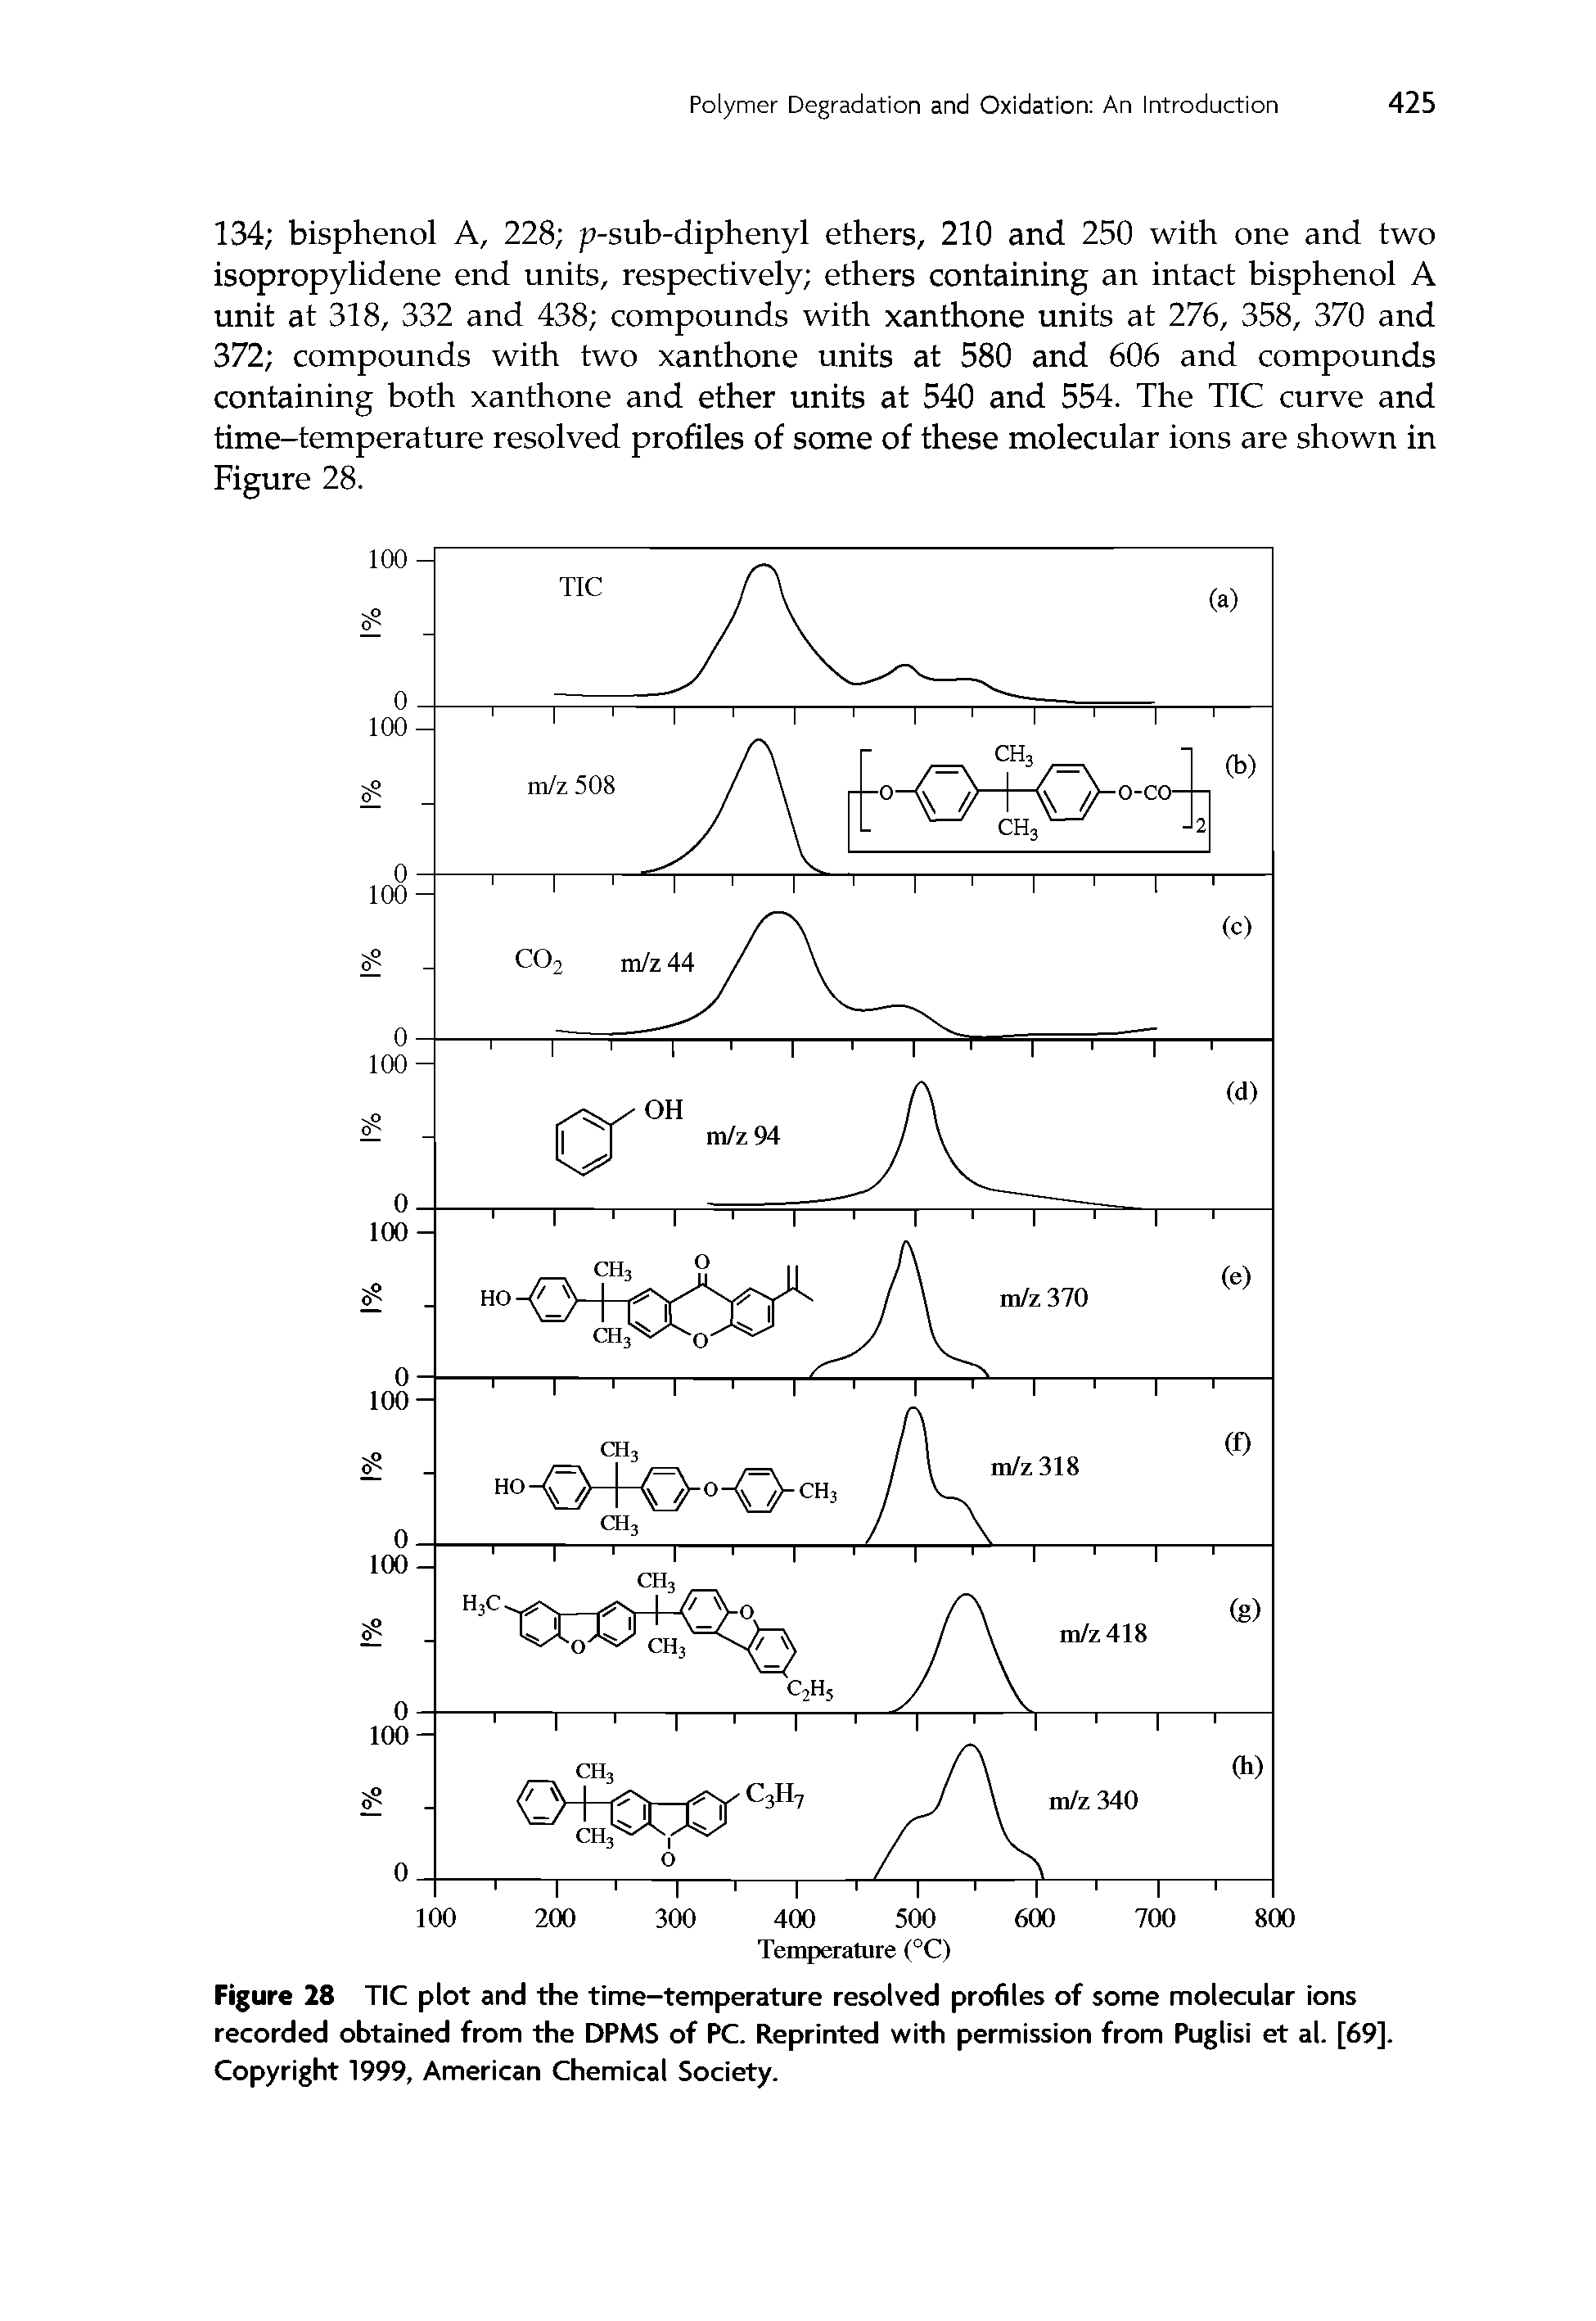 Figure 28 TIC plot and the time-temperature resolved profiles of some molecular ions recorded obtained from the DPMS of PC. Reprinted with permission from Puglisi et al. [69]. Copyright 1999, American Chemical Society.